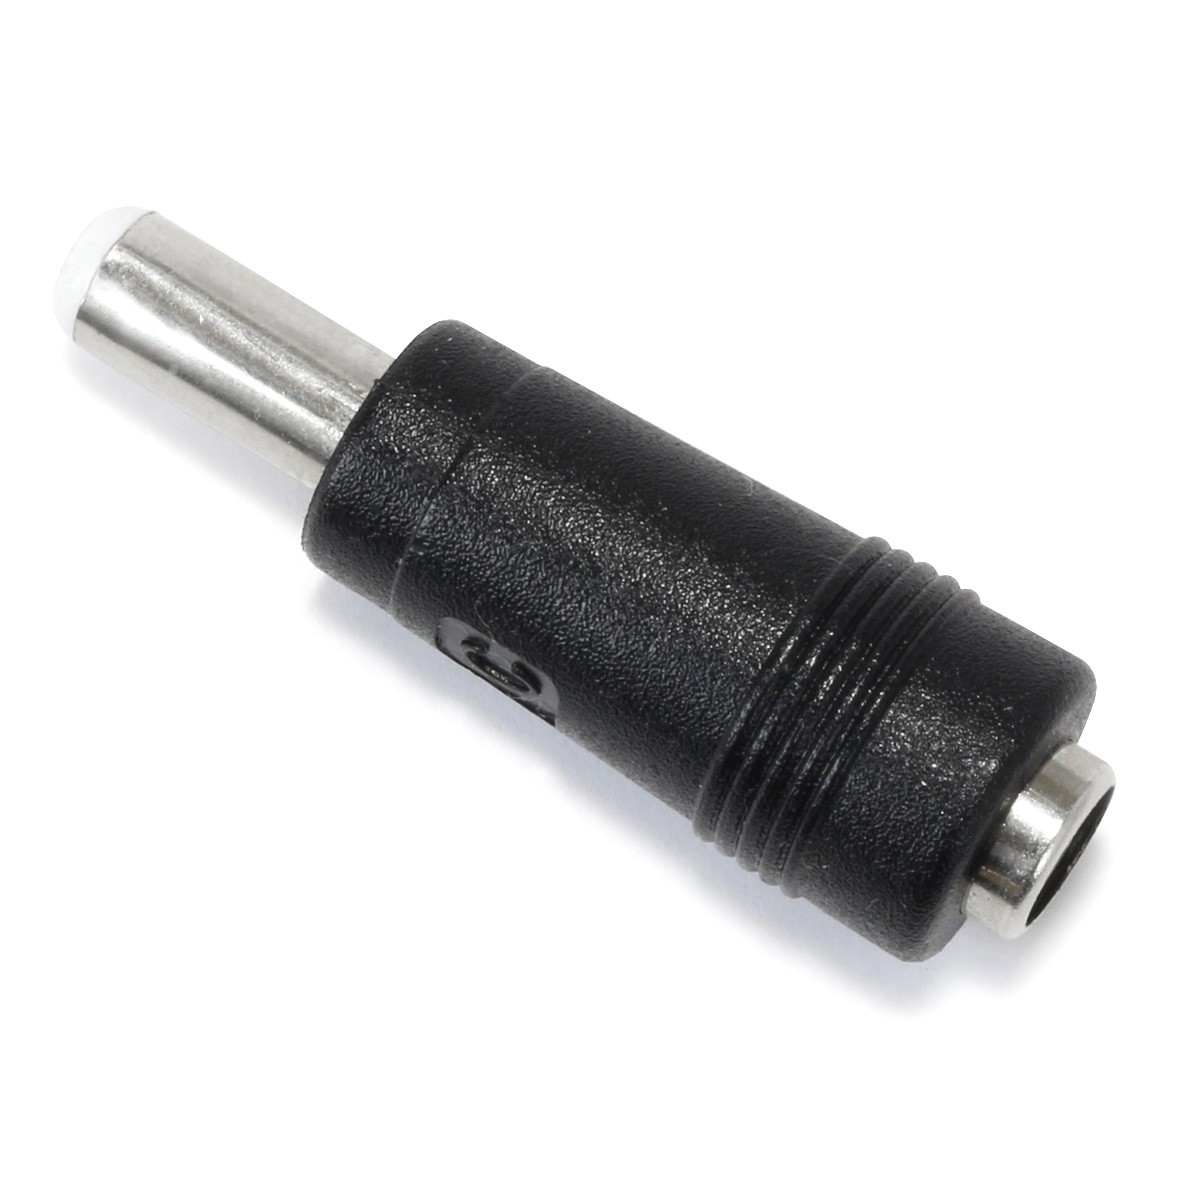 Female Jack DC 5.5 / 2.1mm to Male Jack DC 5.5 / 2.5mm Adapter